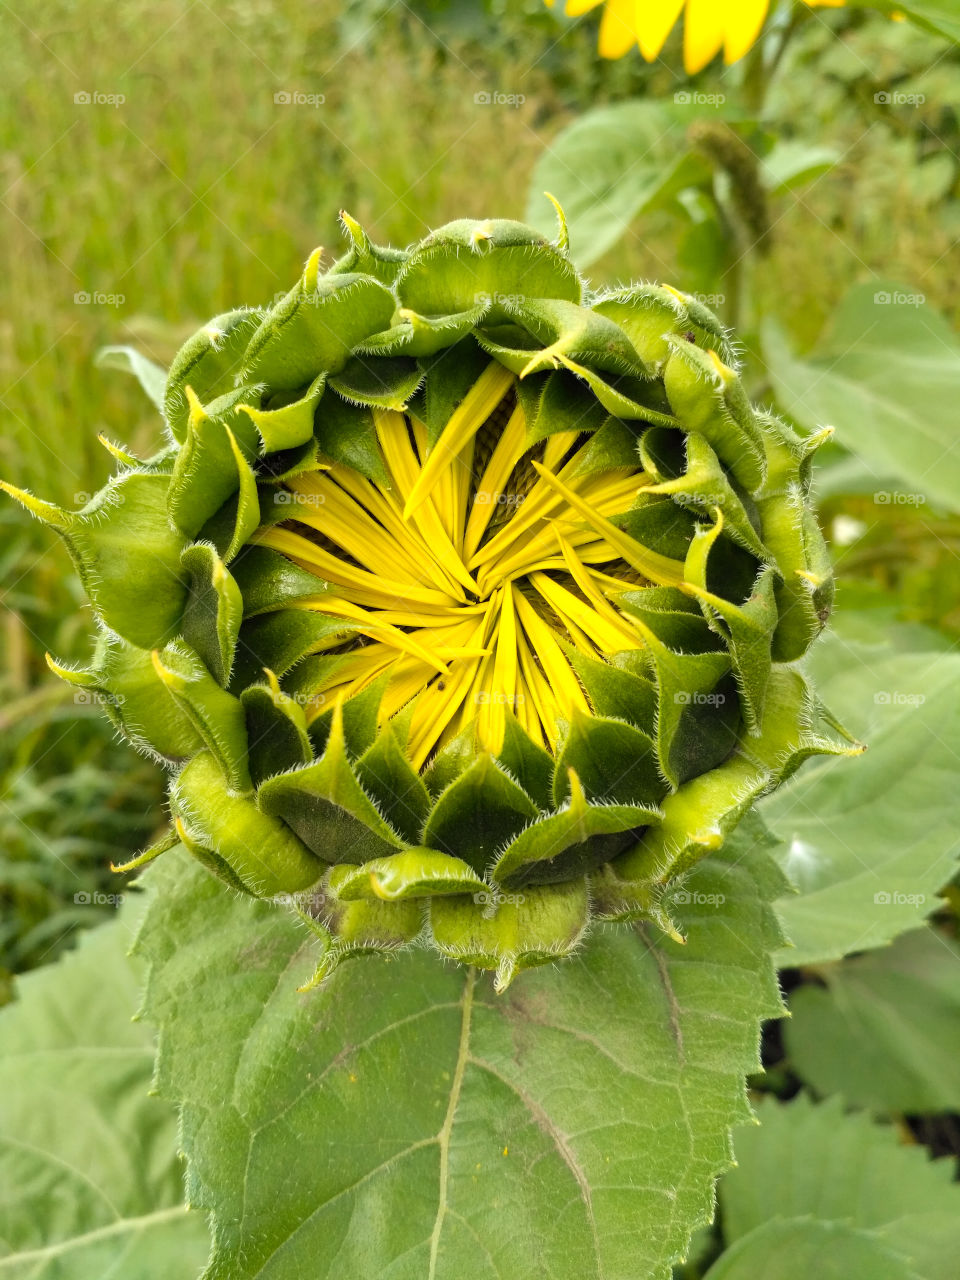 Sunflower not blooming